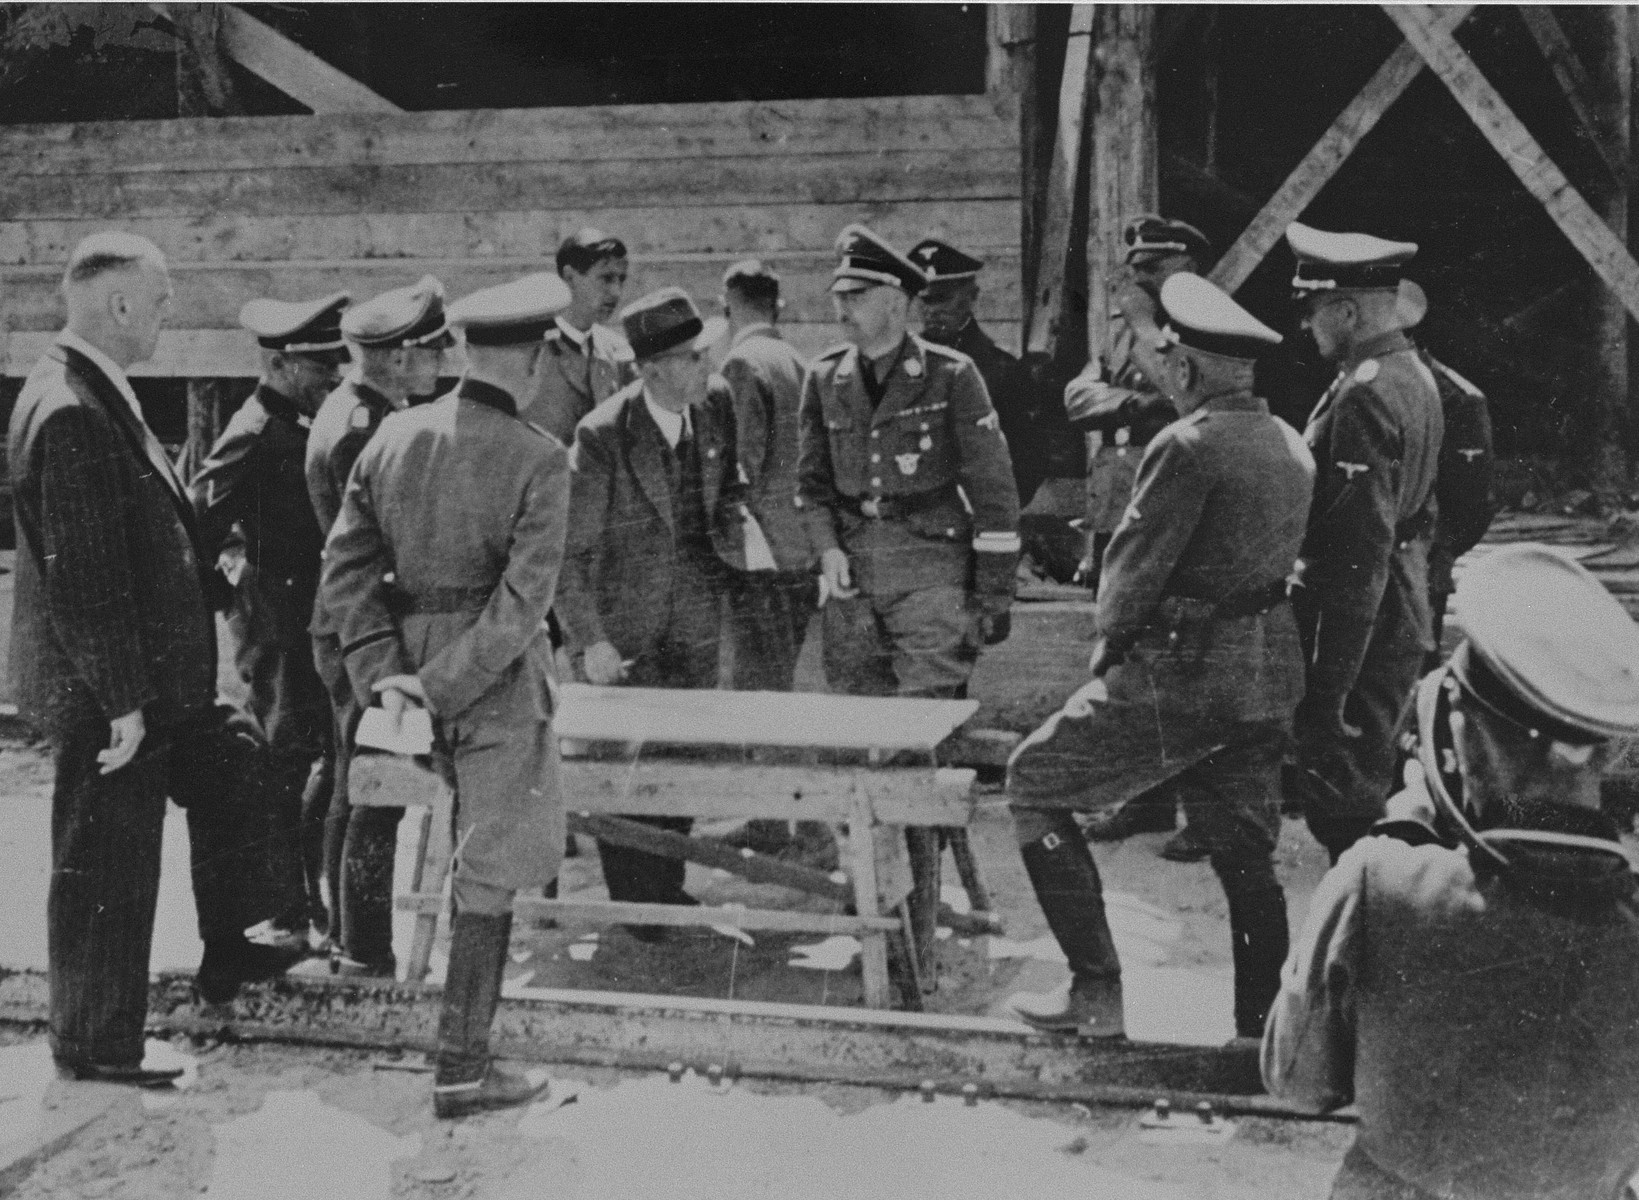 Reichsfuehrer SS Heinrich Himmler converses with Max Faust (wearing the fedora) while looking at a building plan during a tour of the Monowitz-Buna building site.

Faust, who was an IG Farben engineer, was the head of building operations at Monowitz-Buna.